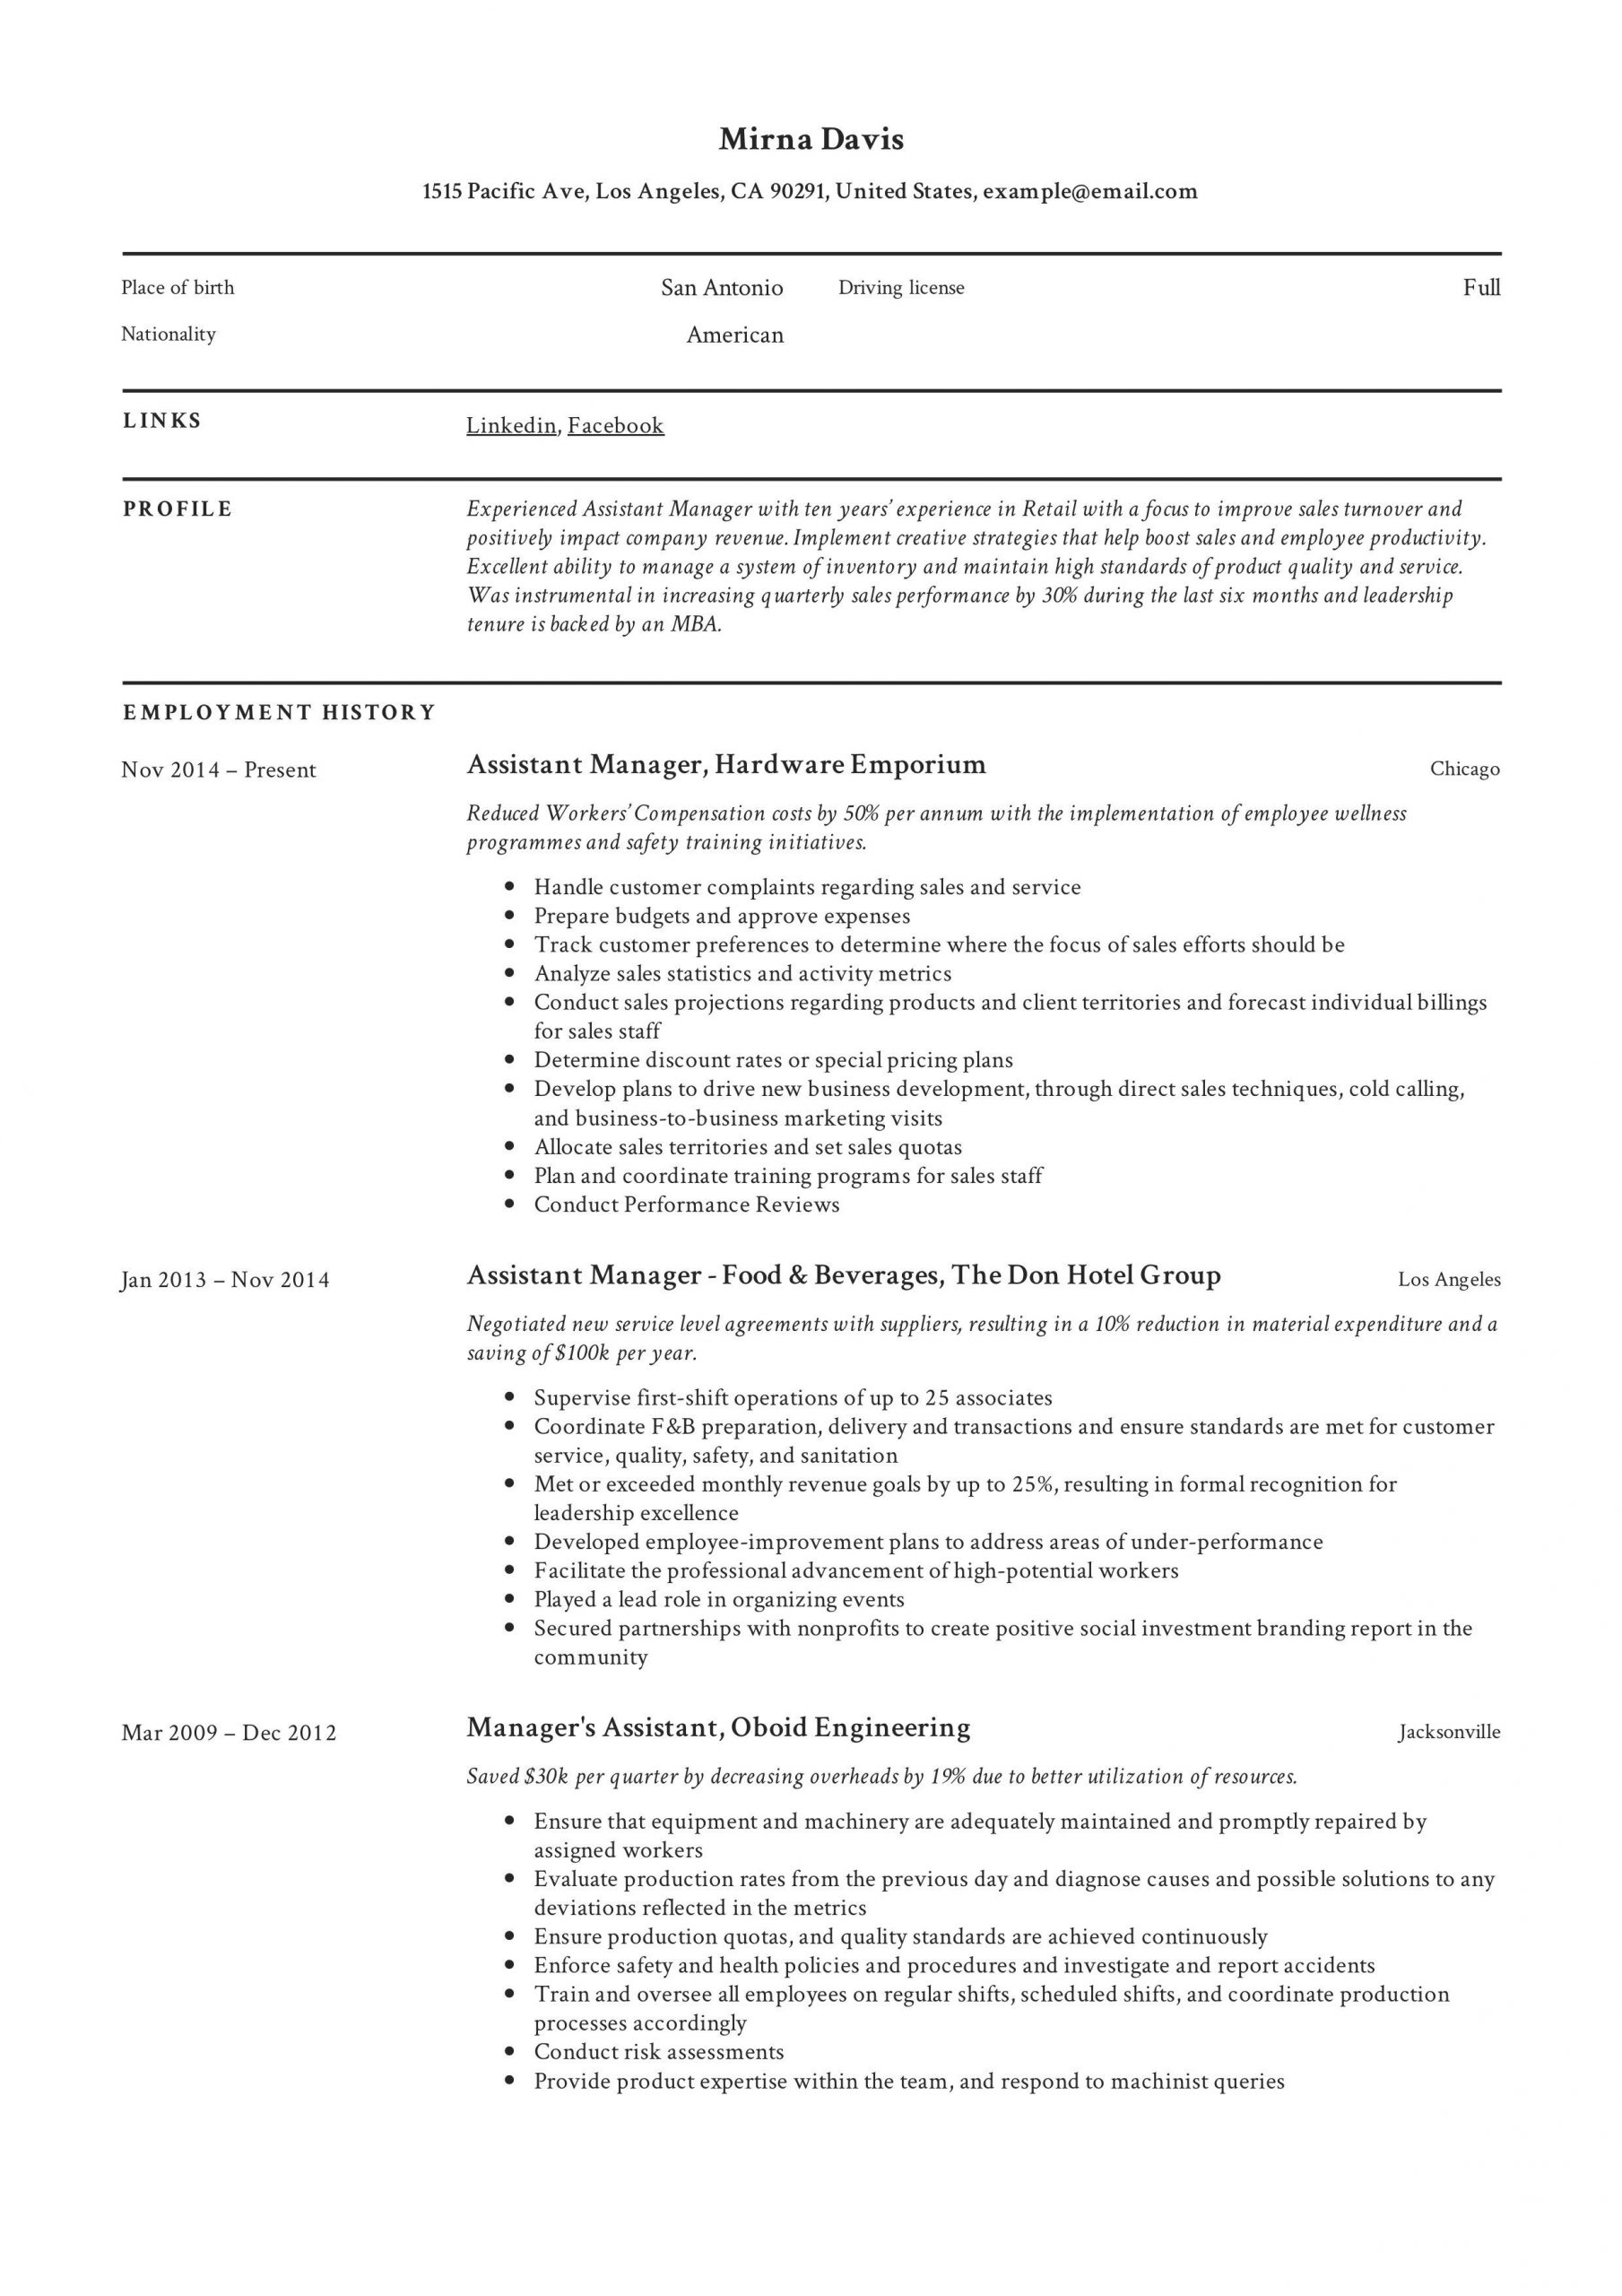 Resume Samples for Retail Store Jobs assistant Manager Resume Template Job Description Template …